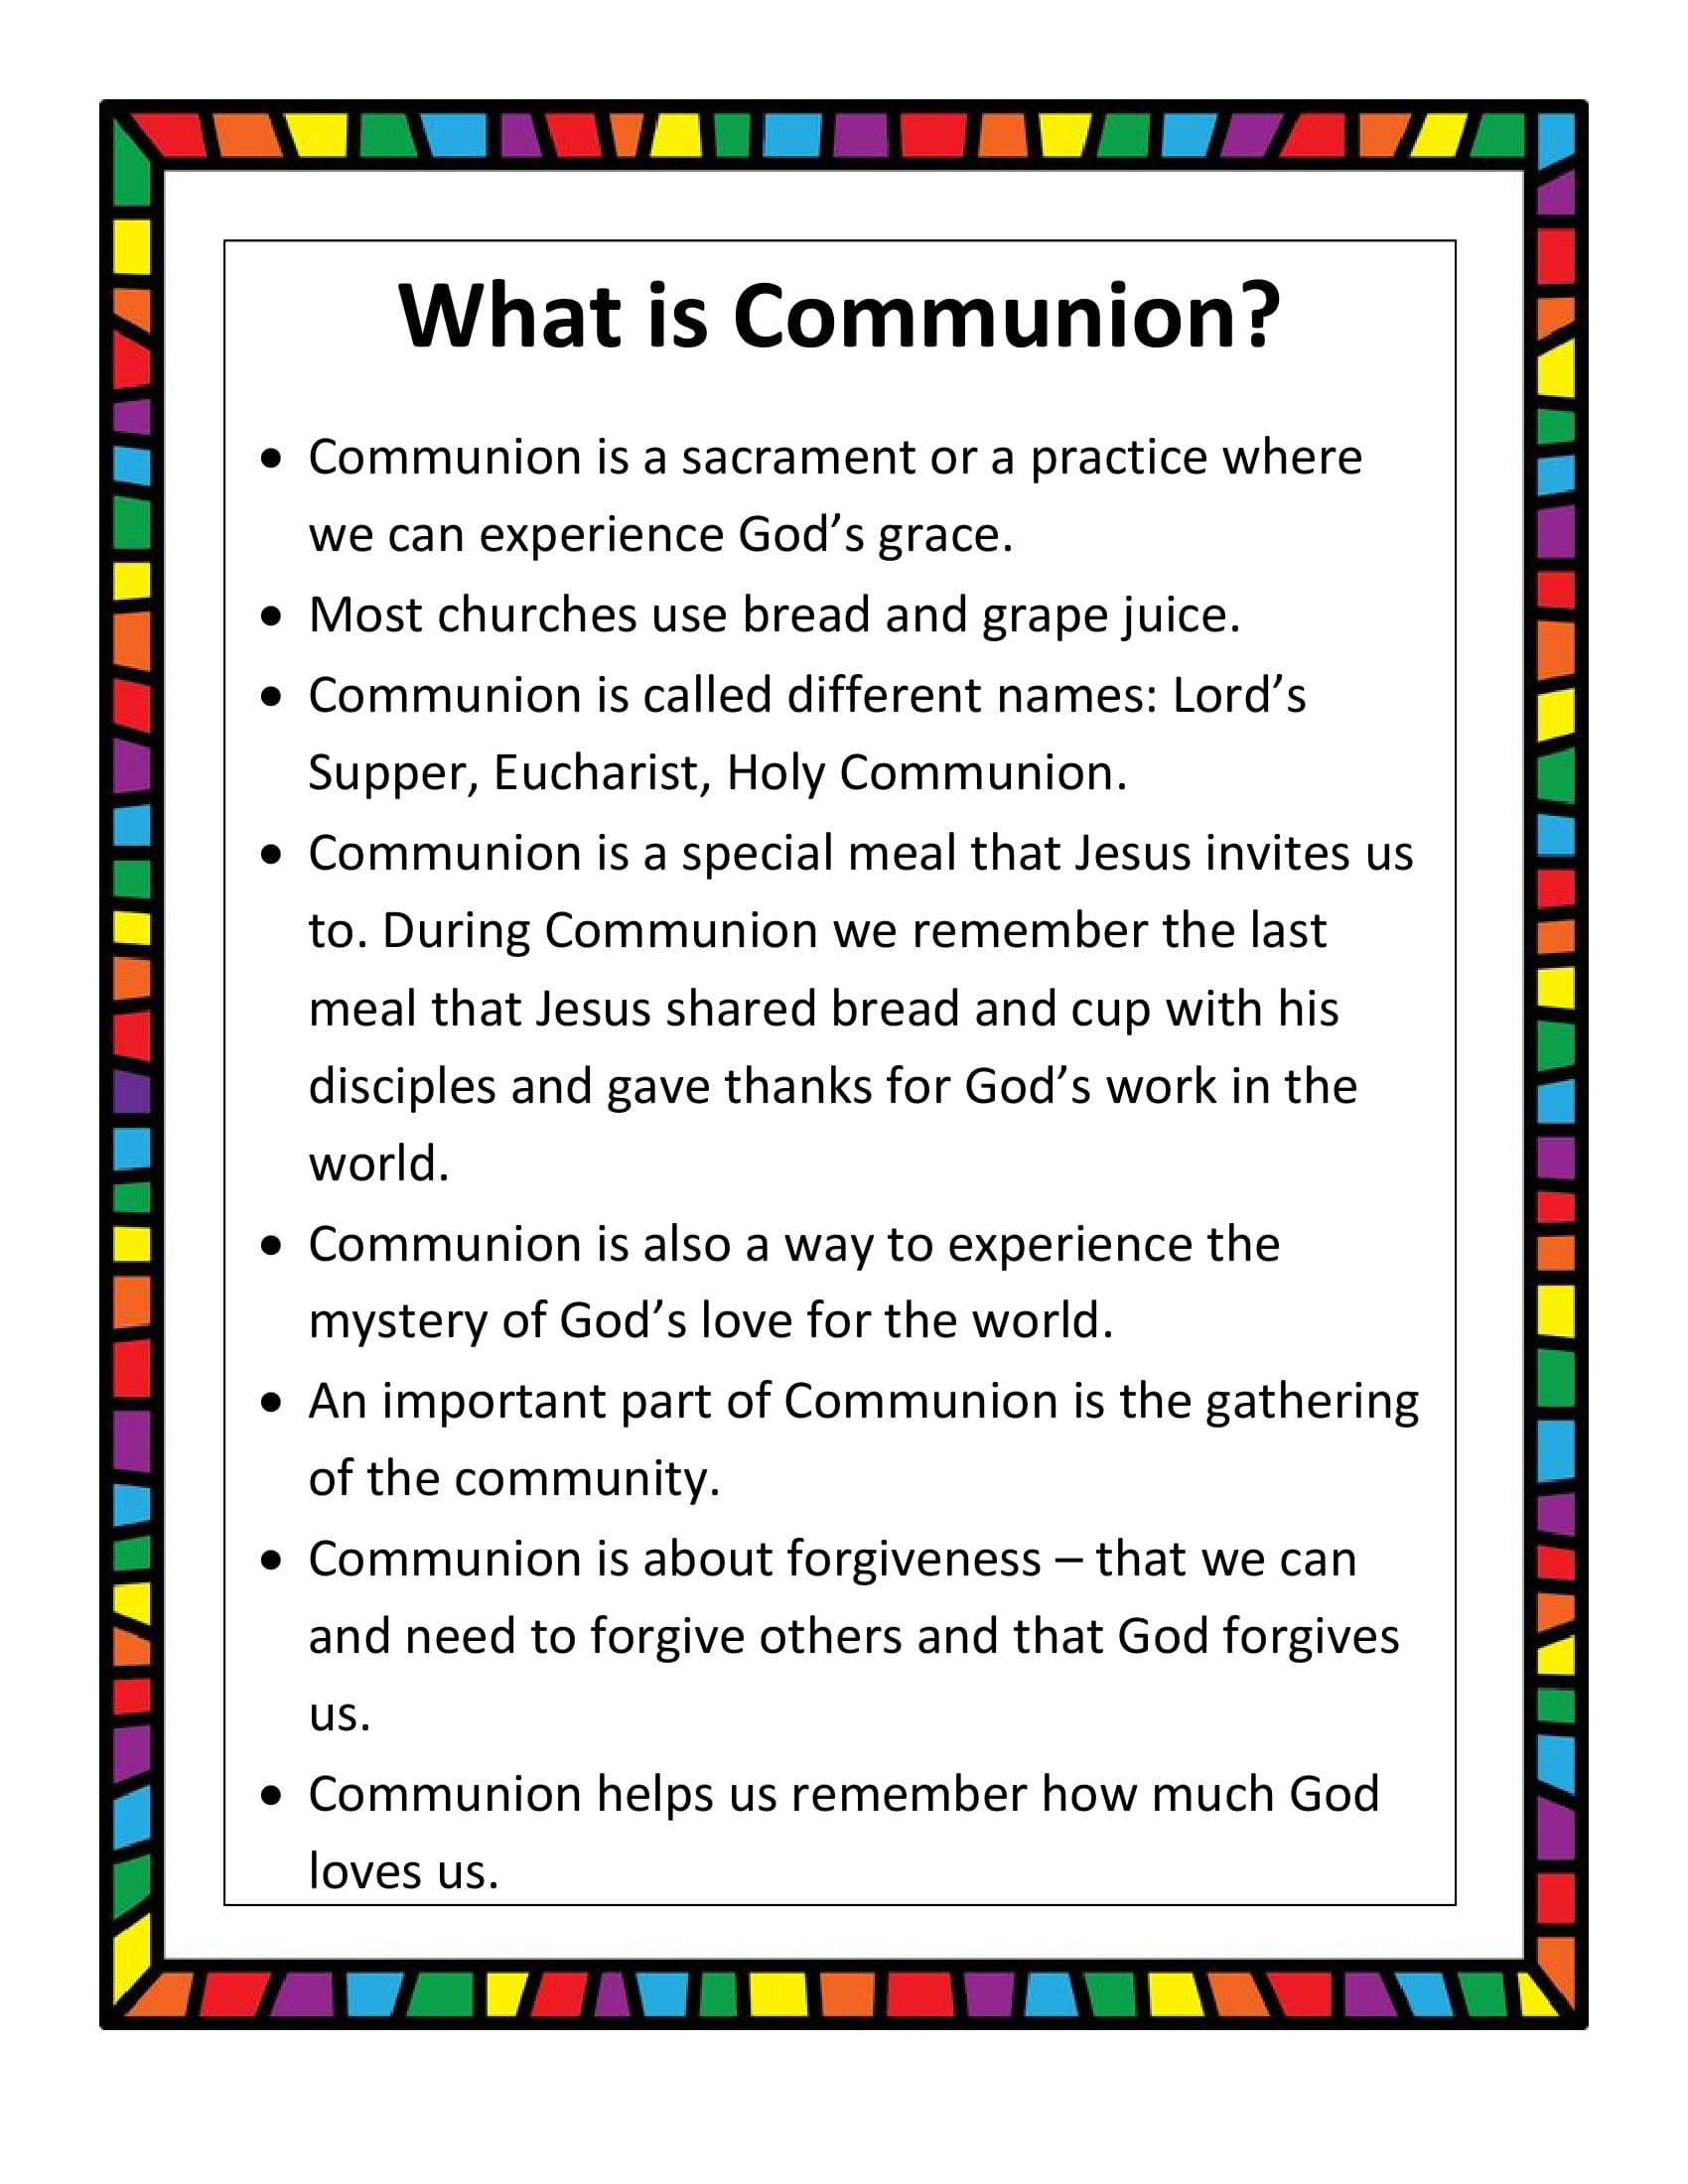 What is Communion text 